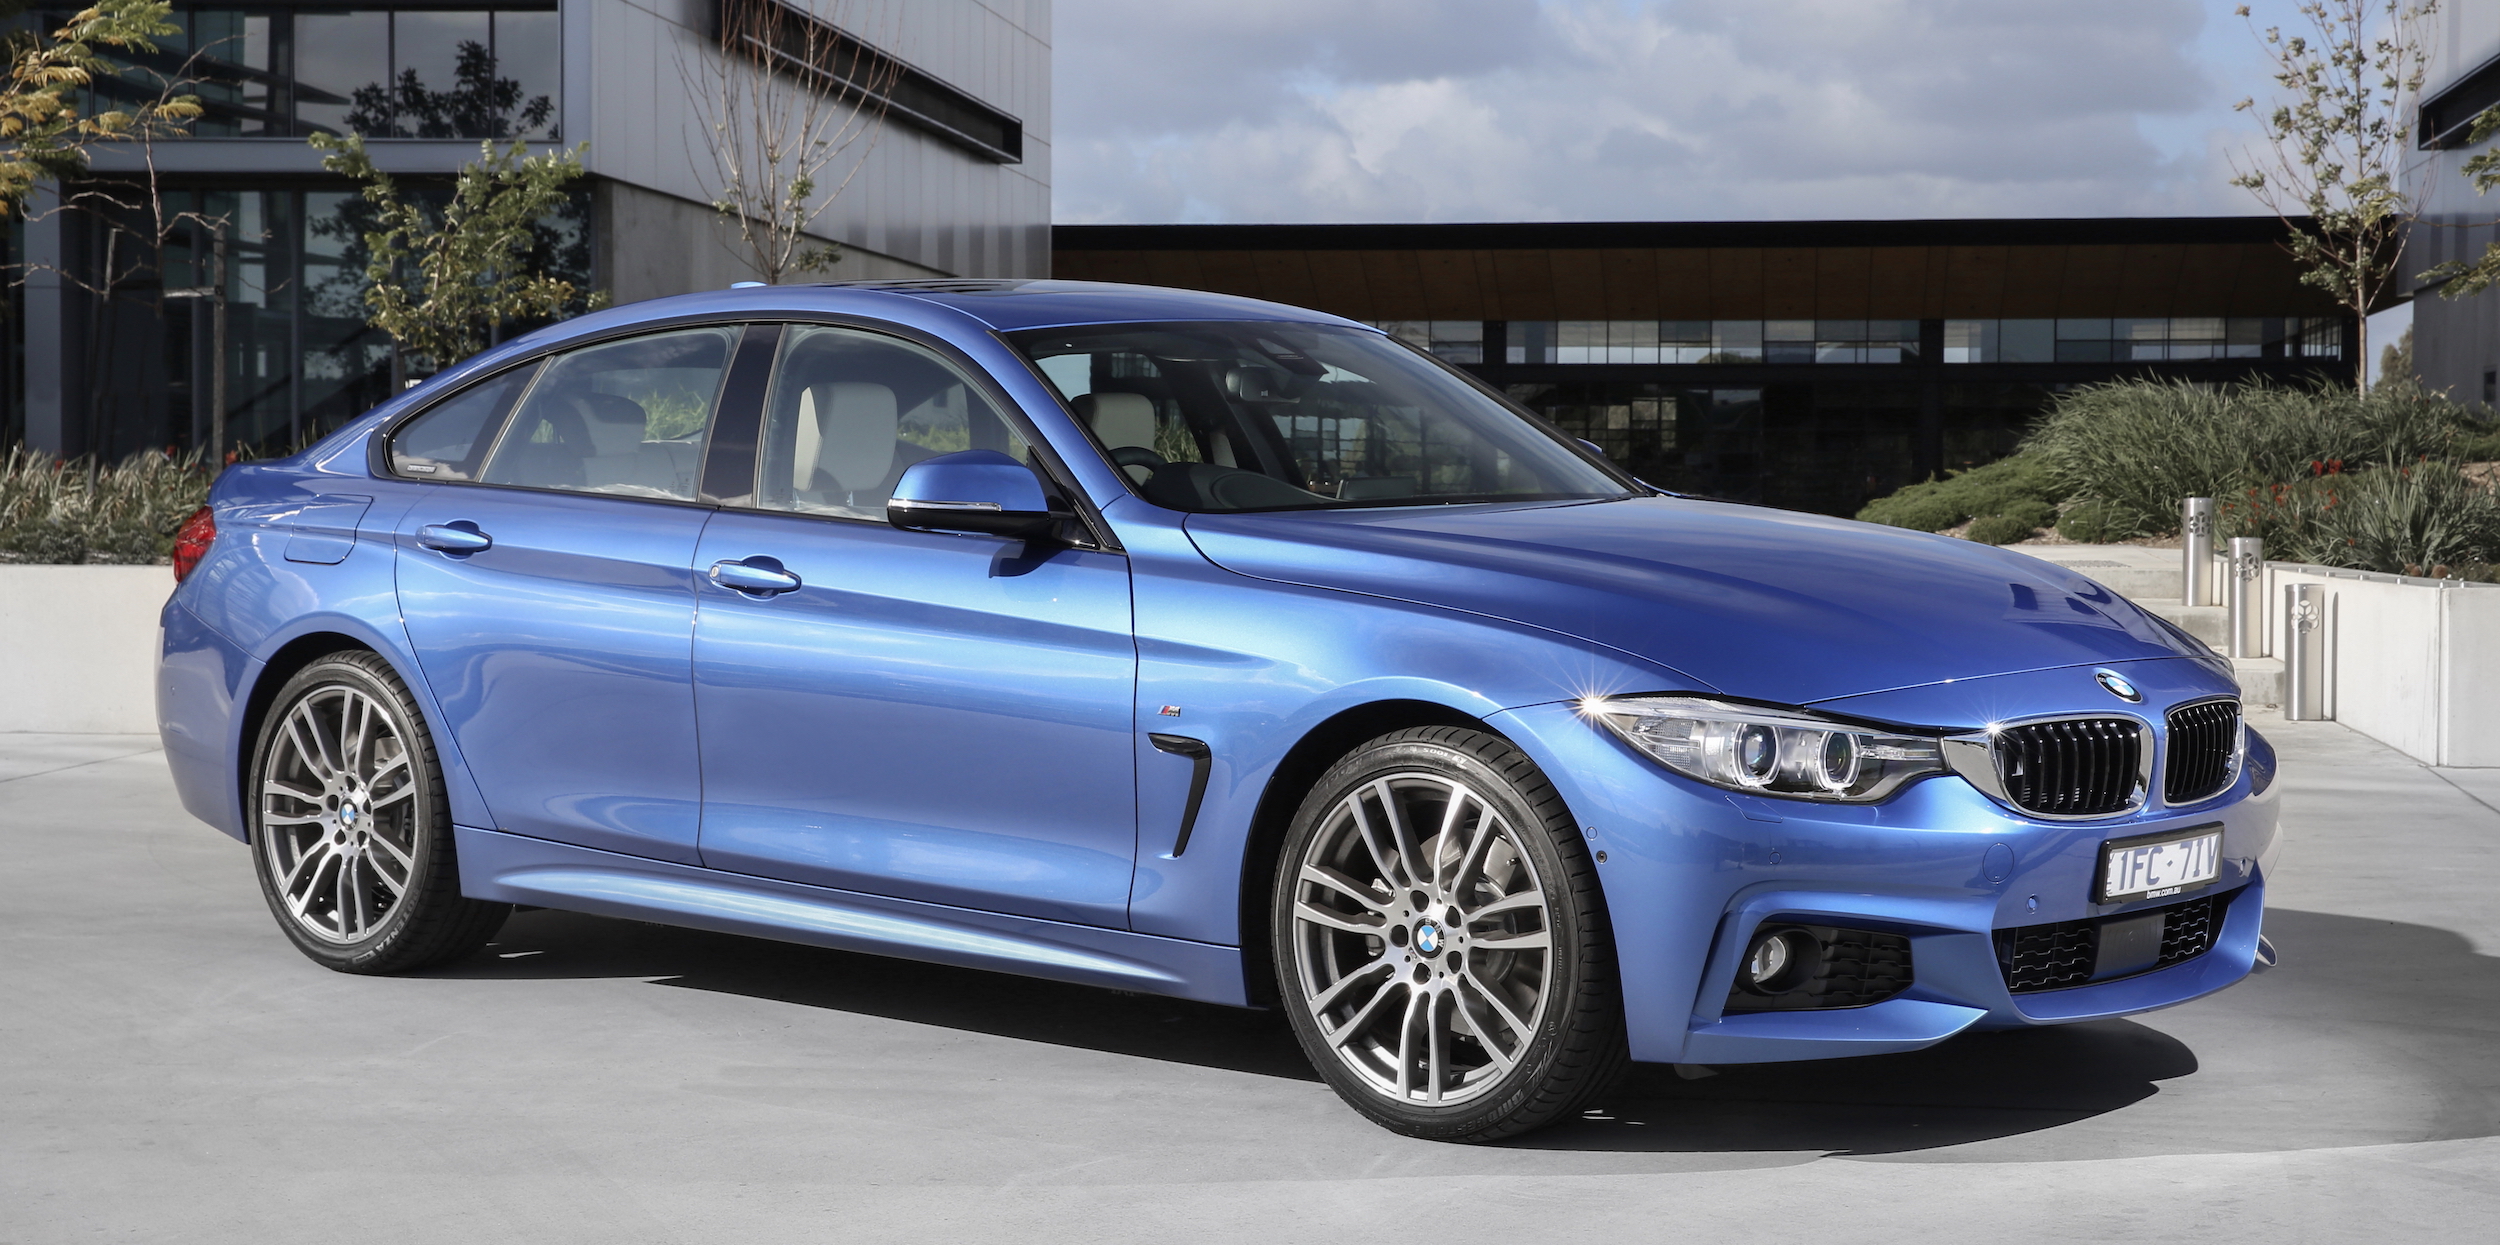 2016 BMW 4 Series Gran Coupe Review photos CarAdvice - bmw-vision